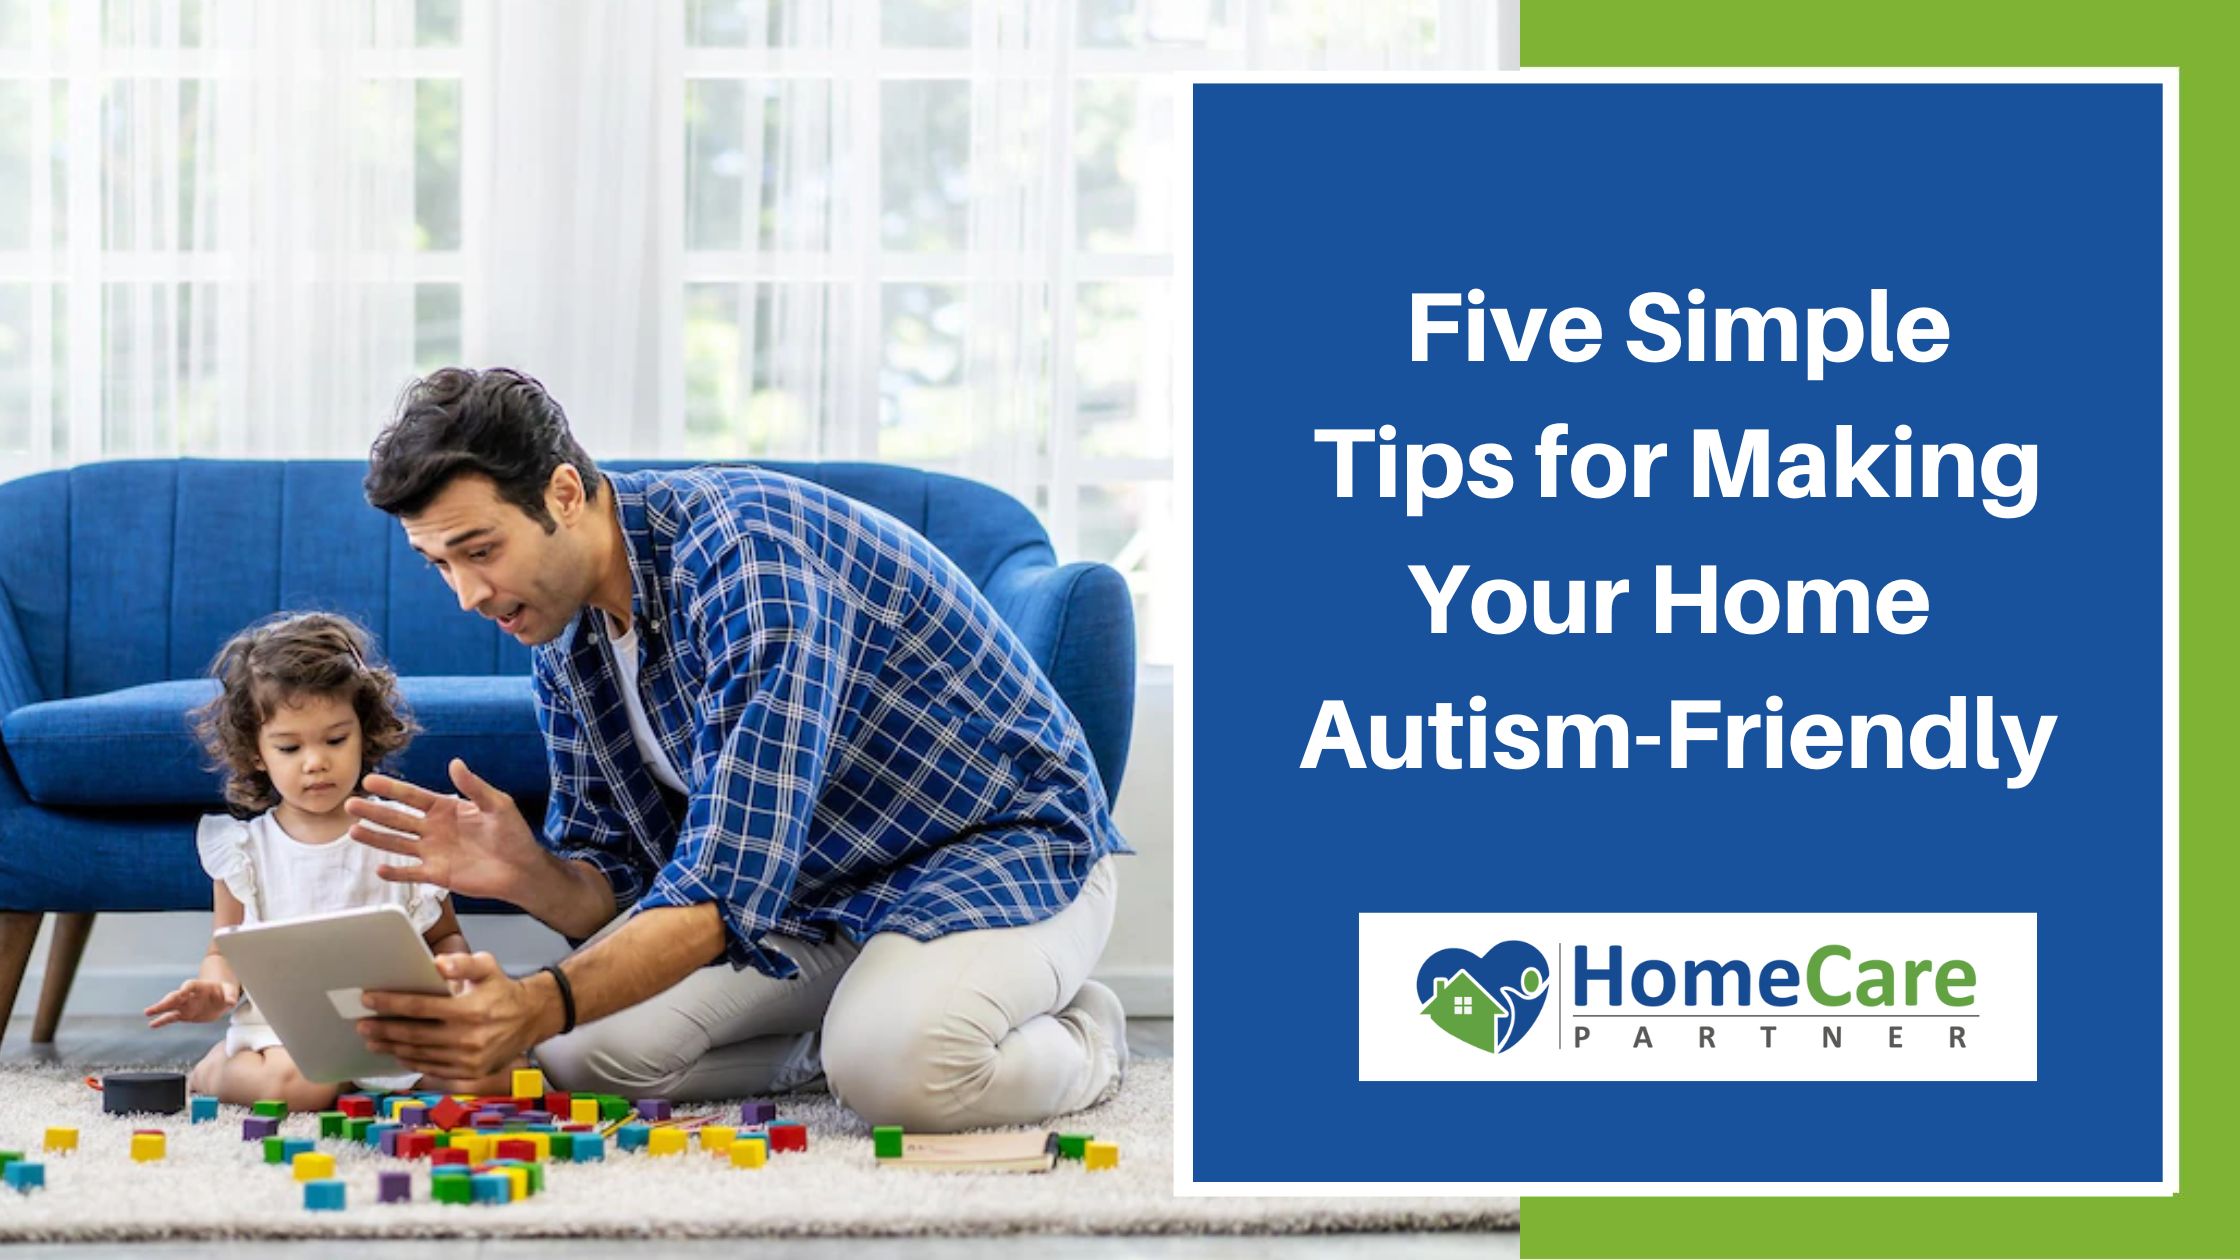 5 Simple Tips for Making Your Home Autism-Friendly